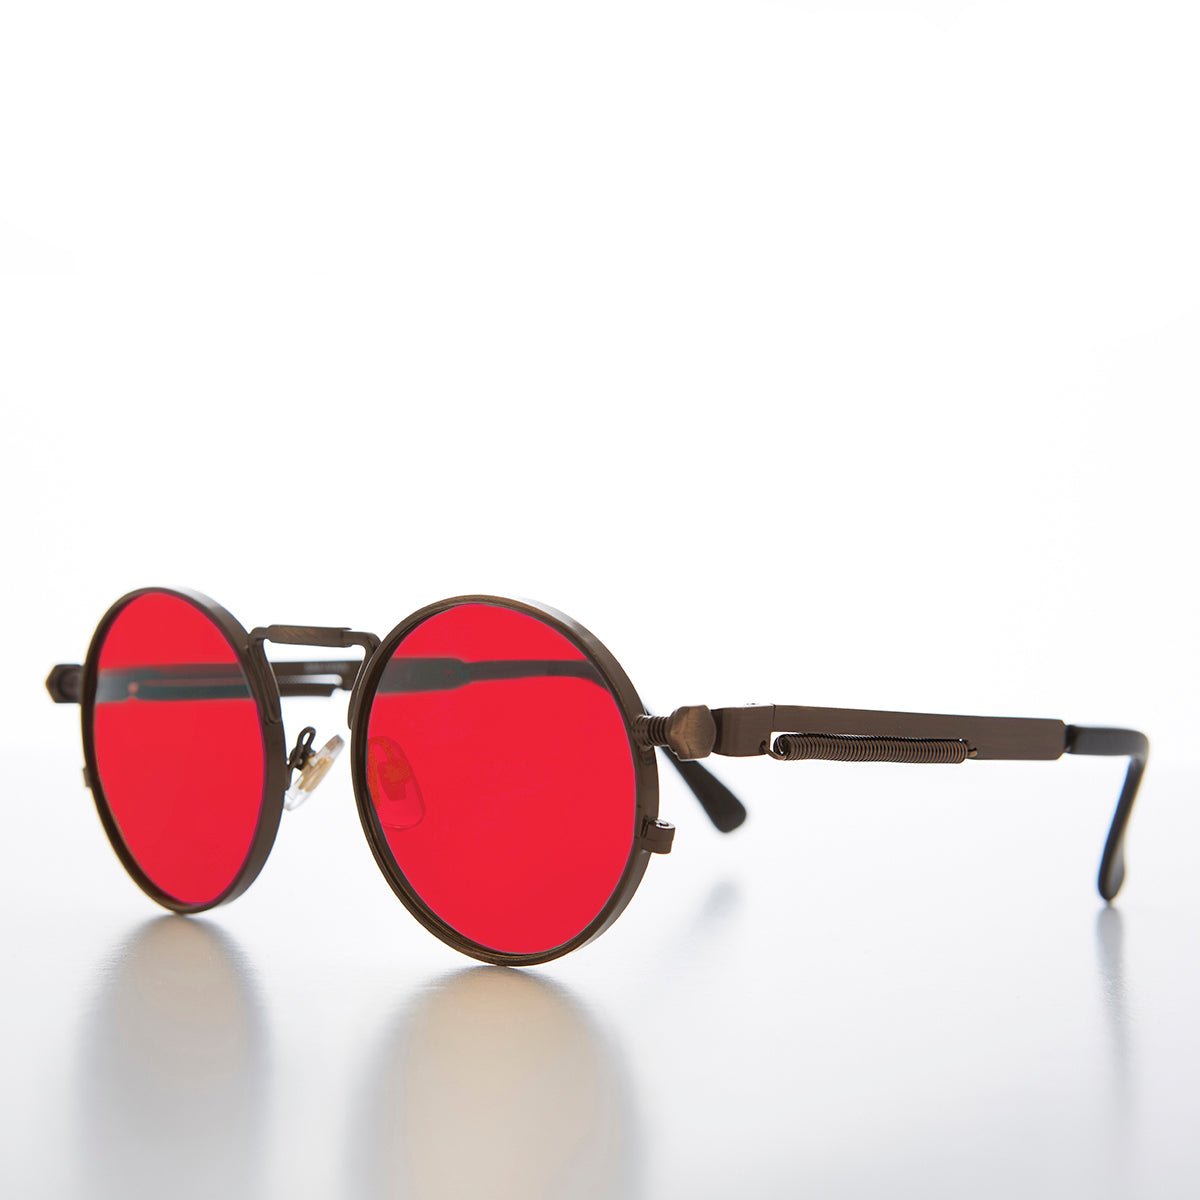 round steampunk sunglass with red lens